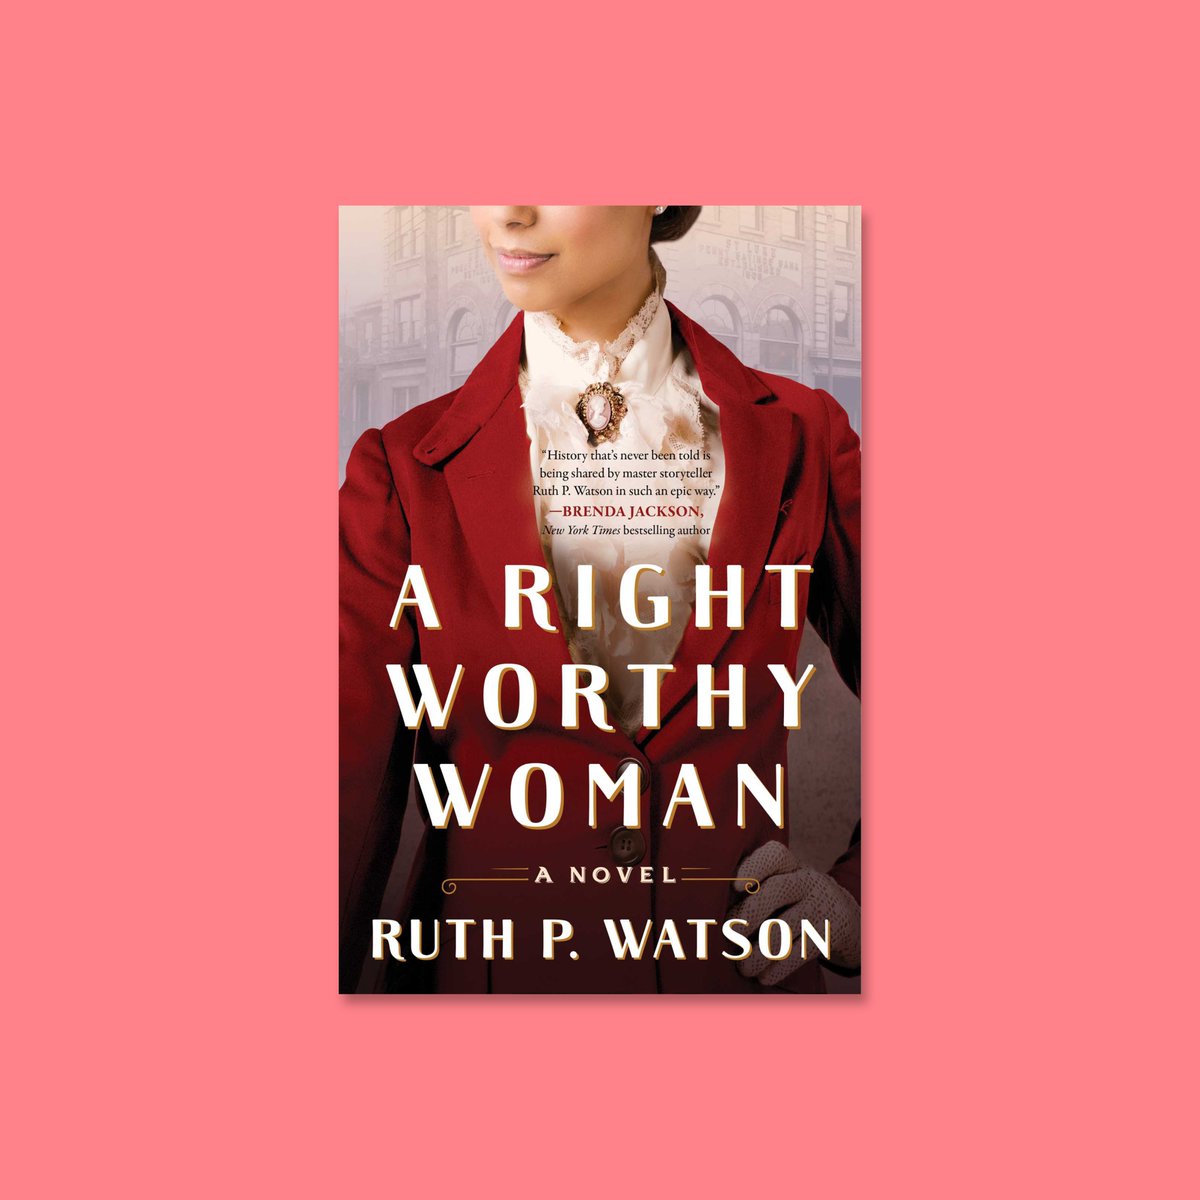 Next Wednesday, June 21: Author @RuthPWatson joins @VanessaRiley to discuss “A Right Worthy Woman,” an inspiring novel based on the remarkable true story of Virginia’s Black Wall Street and the indomitable Maggie Lena Walker.